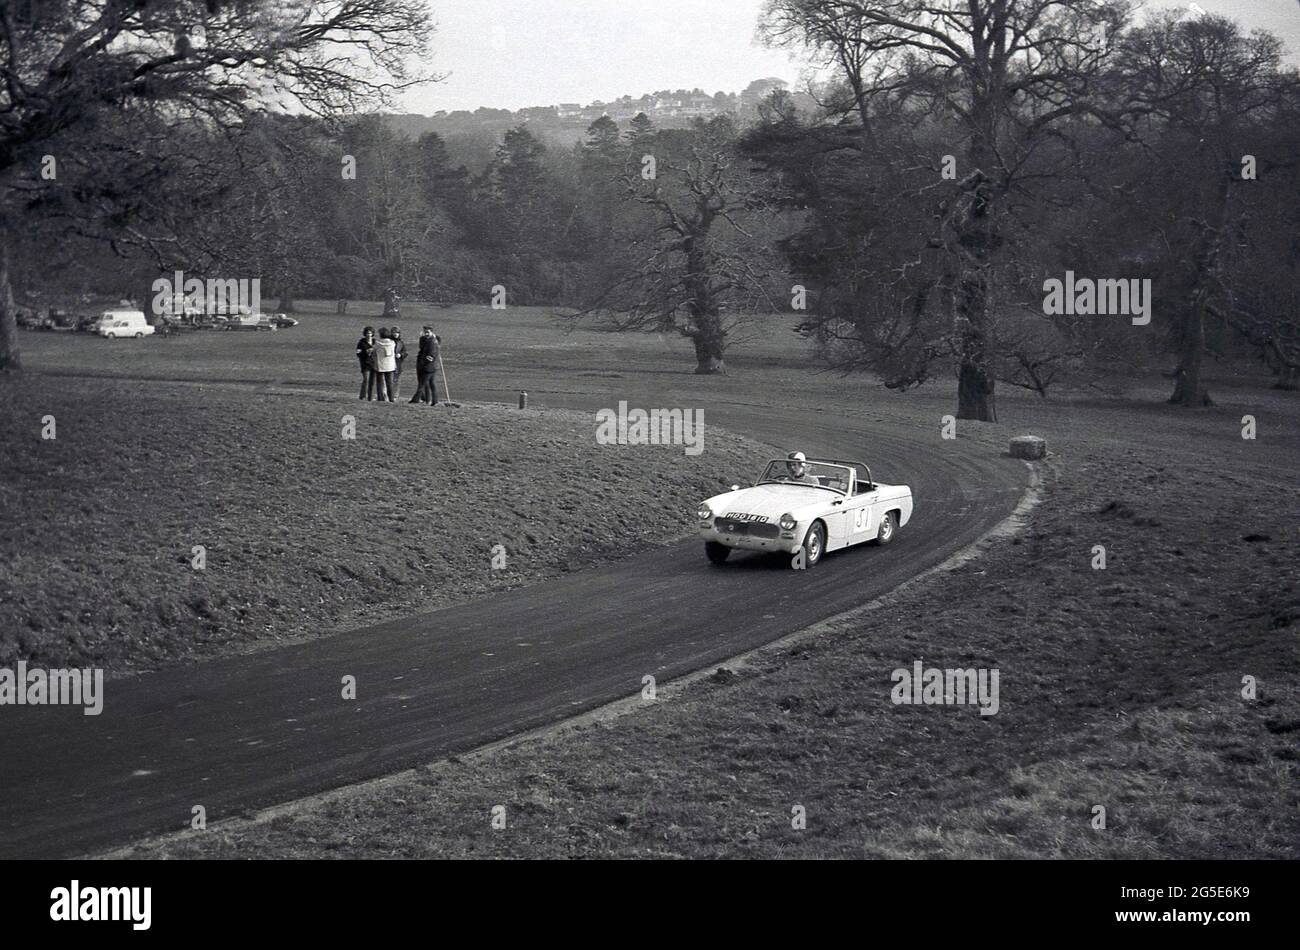 1960s, historical, open top MG Midget motor car going around a bend on a countryside rmotor racing circuit, England, UK. Note the solidarity straw bale on the corner. The small two-seater MG Midget sports car was made by MG from 1961 to 1979, orginally based on the Austin-Healey Sprite. Stock Photo